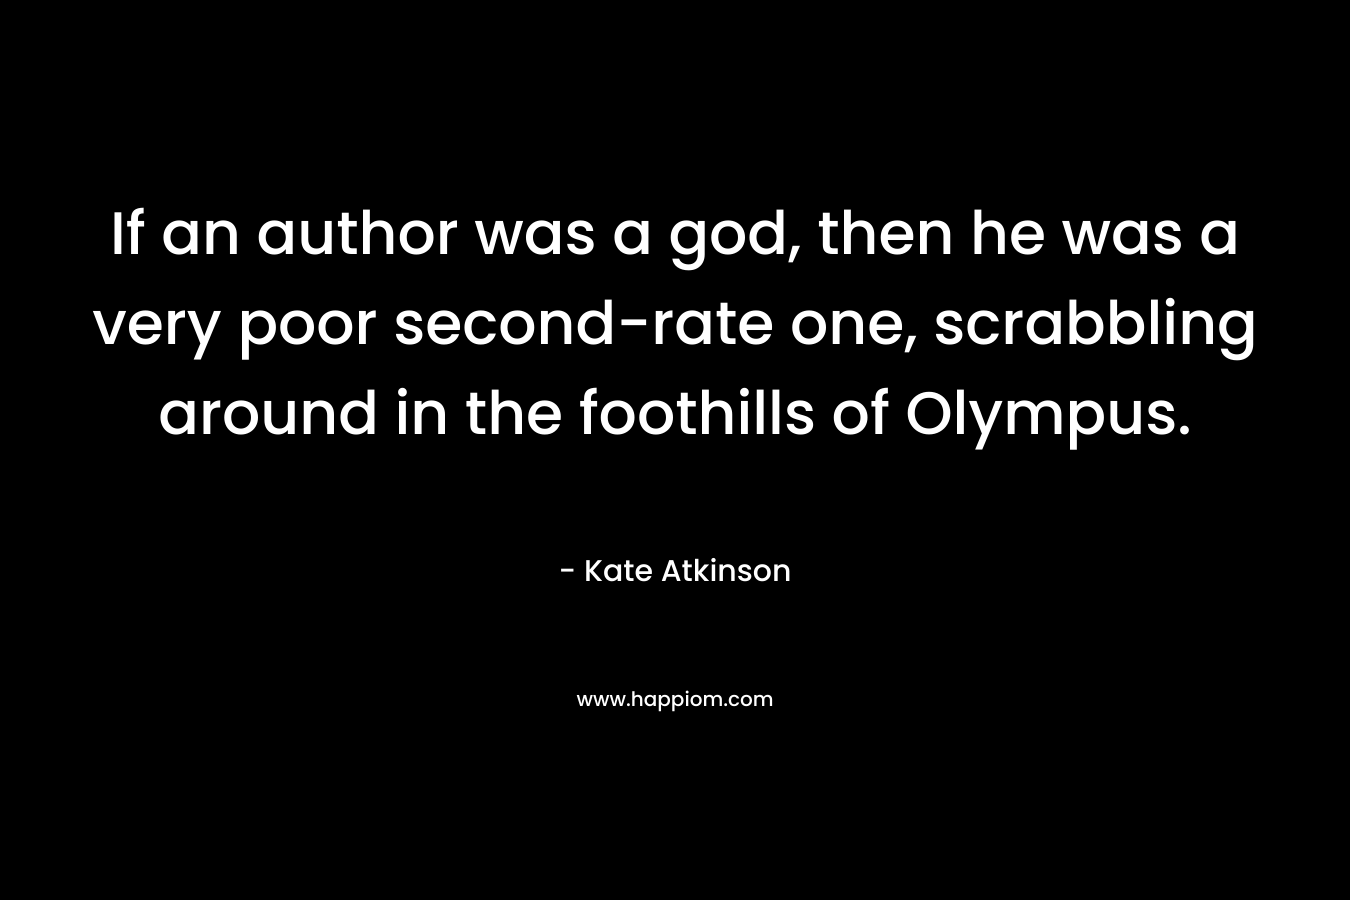 If an author was a god, then he was a very poor second-rate one, scrabbling around in the foothills of Olympus. – Kate Atkinson